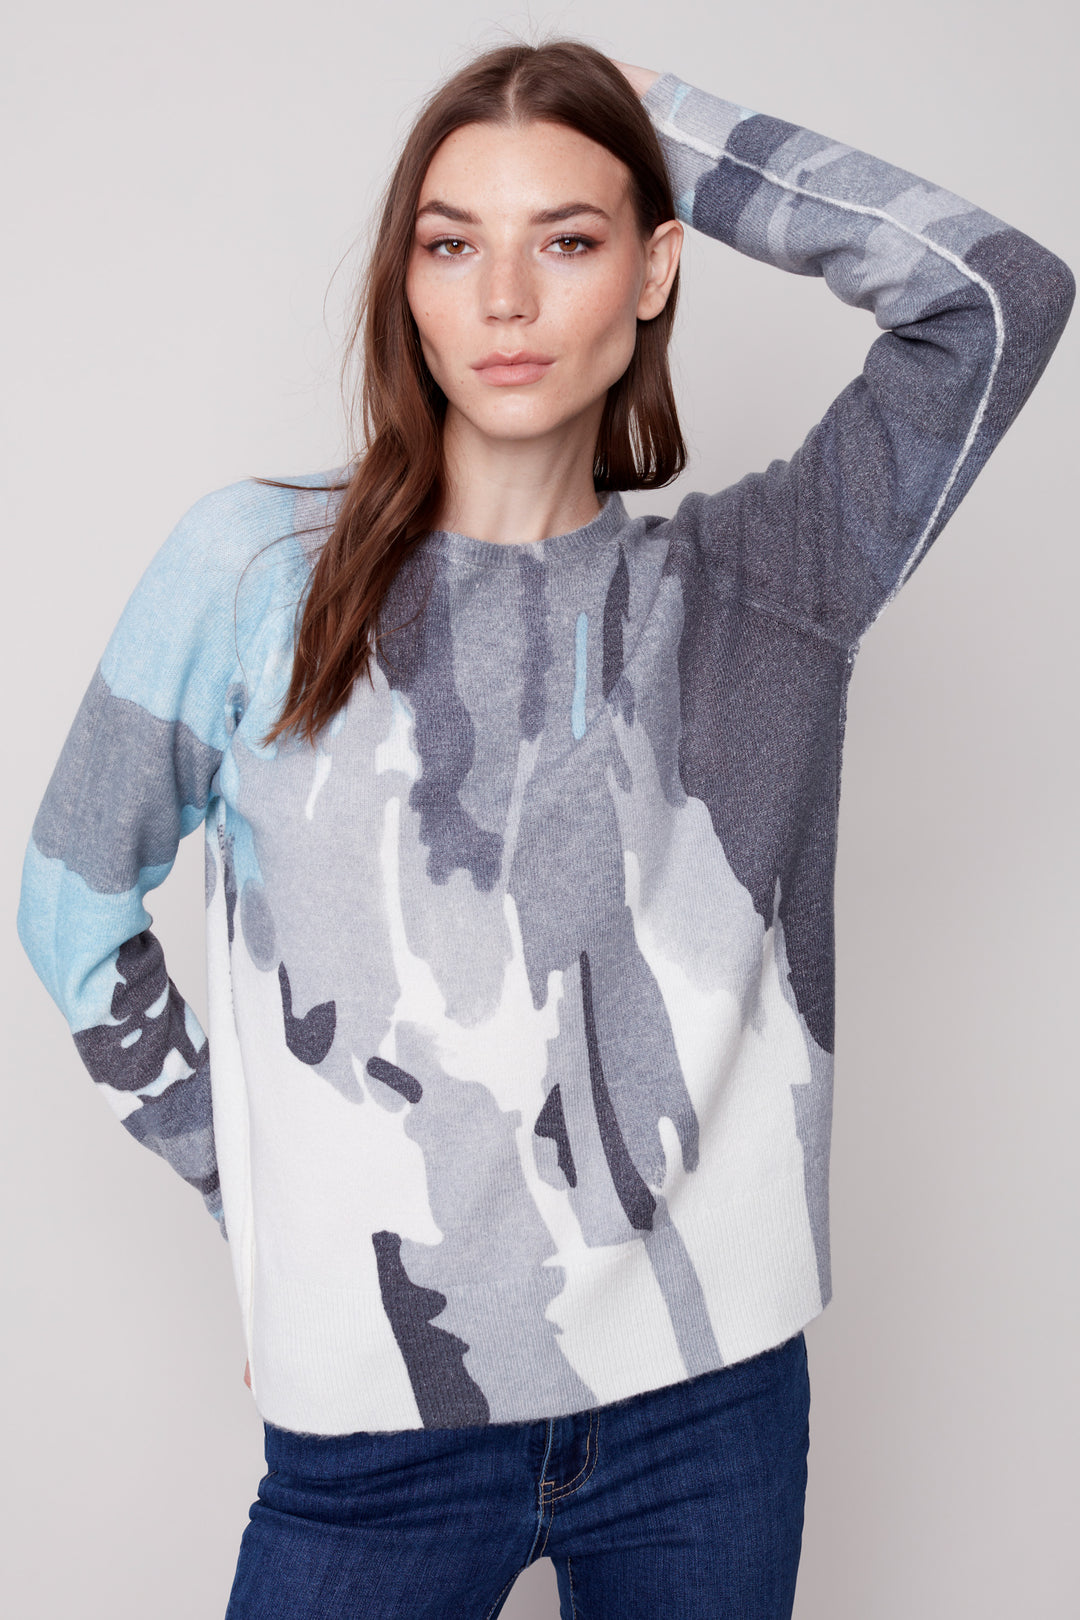  The printed crew neck sweater is designed with a crew-neck and raglan sleeve for a light, comfortable fit. With a reversible design, this sweater is perfect for any occasion.